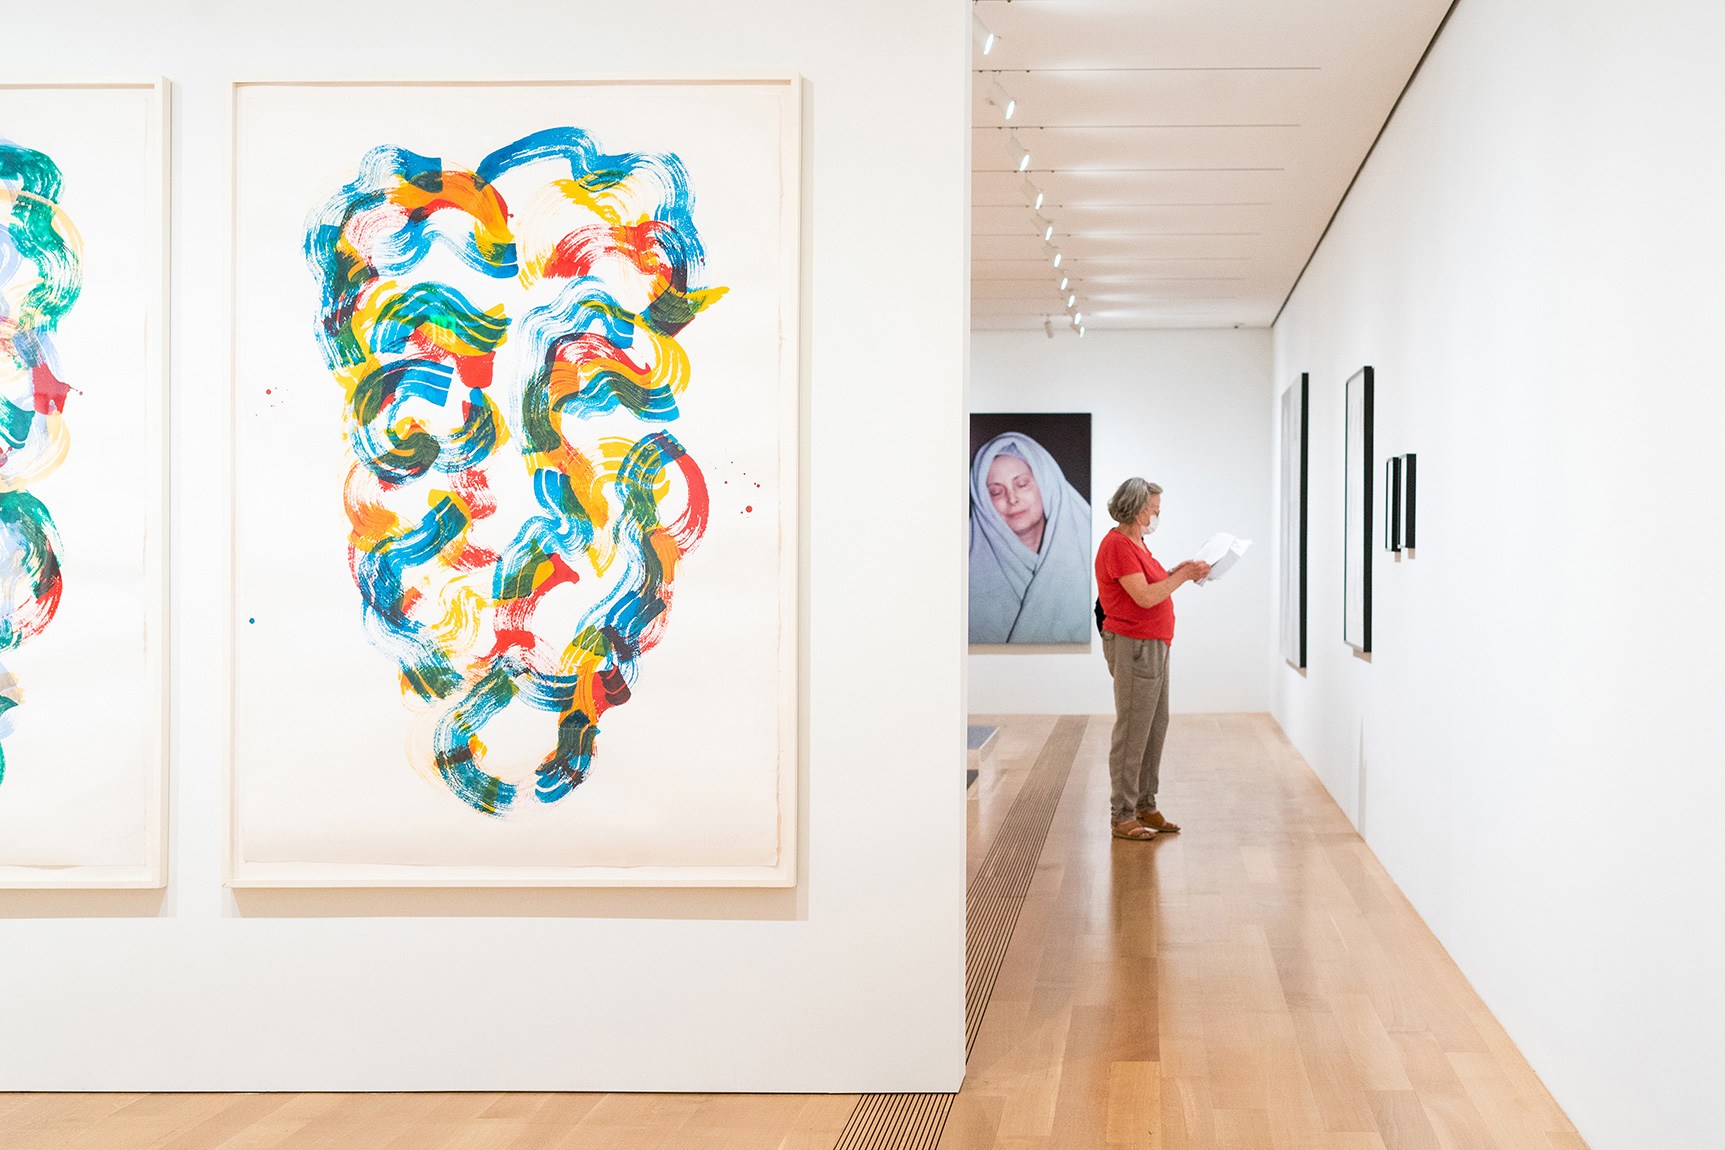 A visitor stands in the galleries; in the foreground is a large colorful abstract portrait of a face; in the background, a portion of a self-portrait is visible